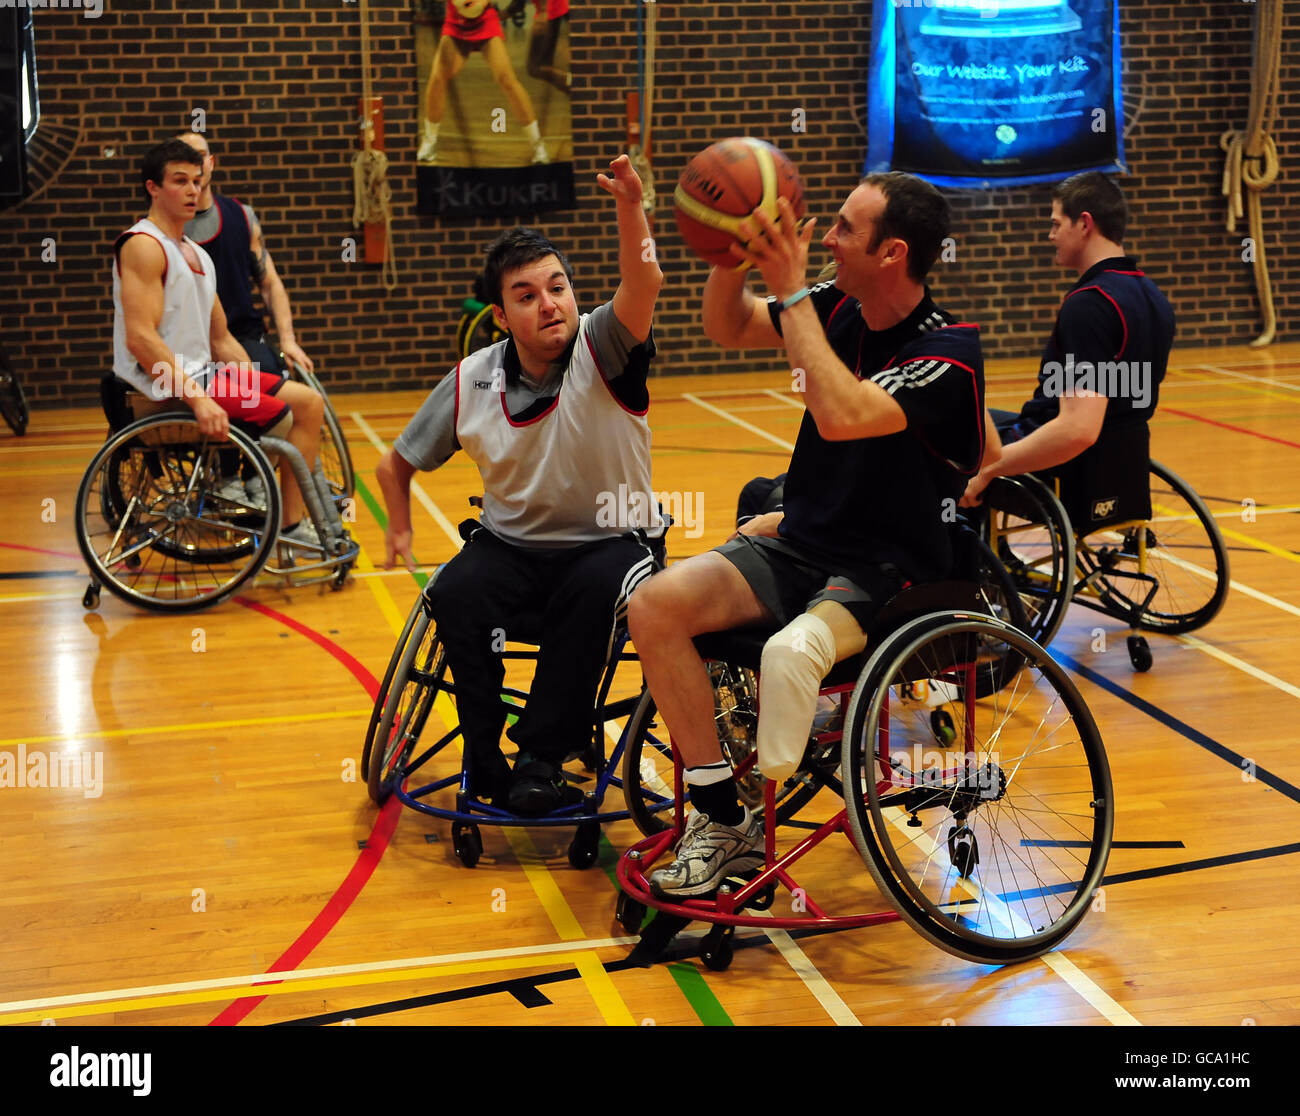 Press Association Journalist Alex Brooker (2nd left) takes part in the Basketball part of the ParalympicsGB London 2012 talent assessment day at the Munrow Sports Centre at the University of Birmingham Stock Photo